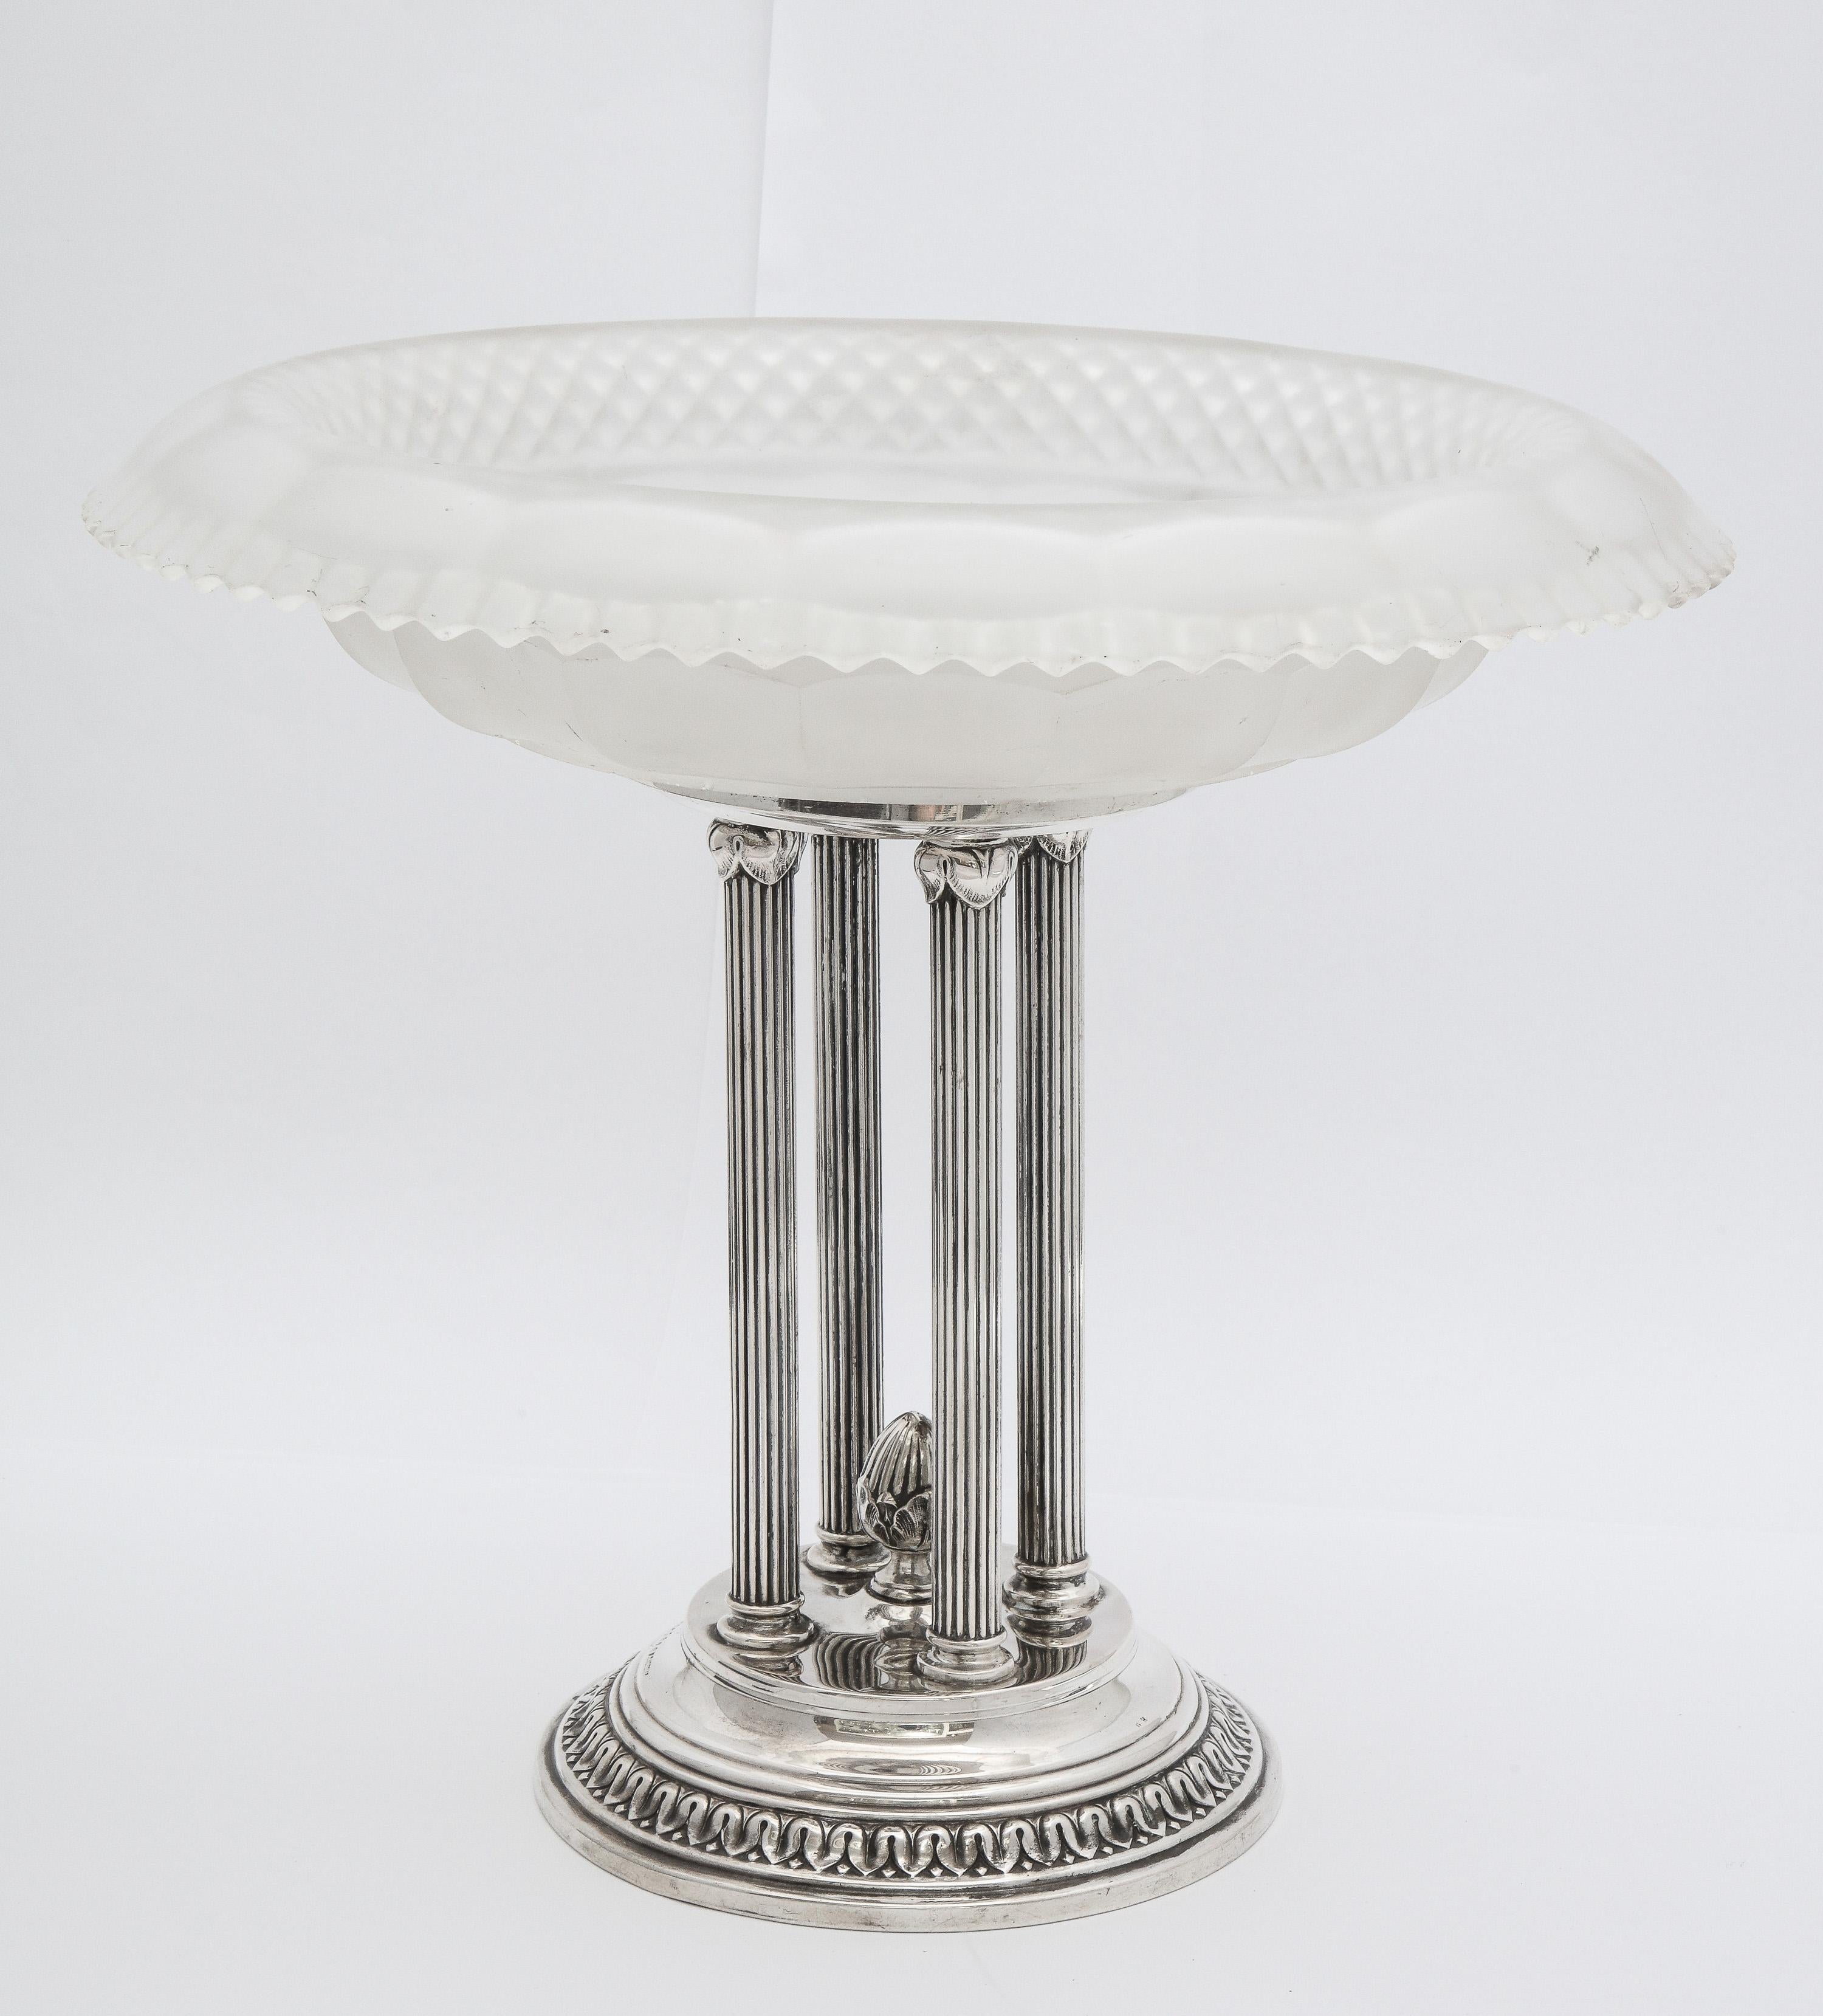 Neoclassical style, Continental Silver (.800) centerpiece, Germany, Ca. 1915, M.T. Wetzlar - maker. The white, frosted glass bowl is supported by four Continental Silver fluted columns. Measures 9 3/4 inches high x 10 inches diameter (across bowl);